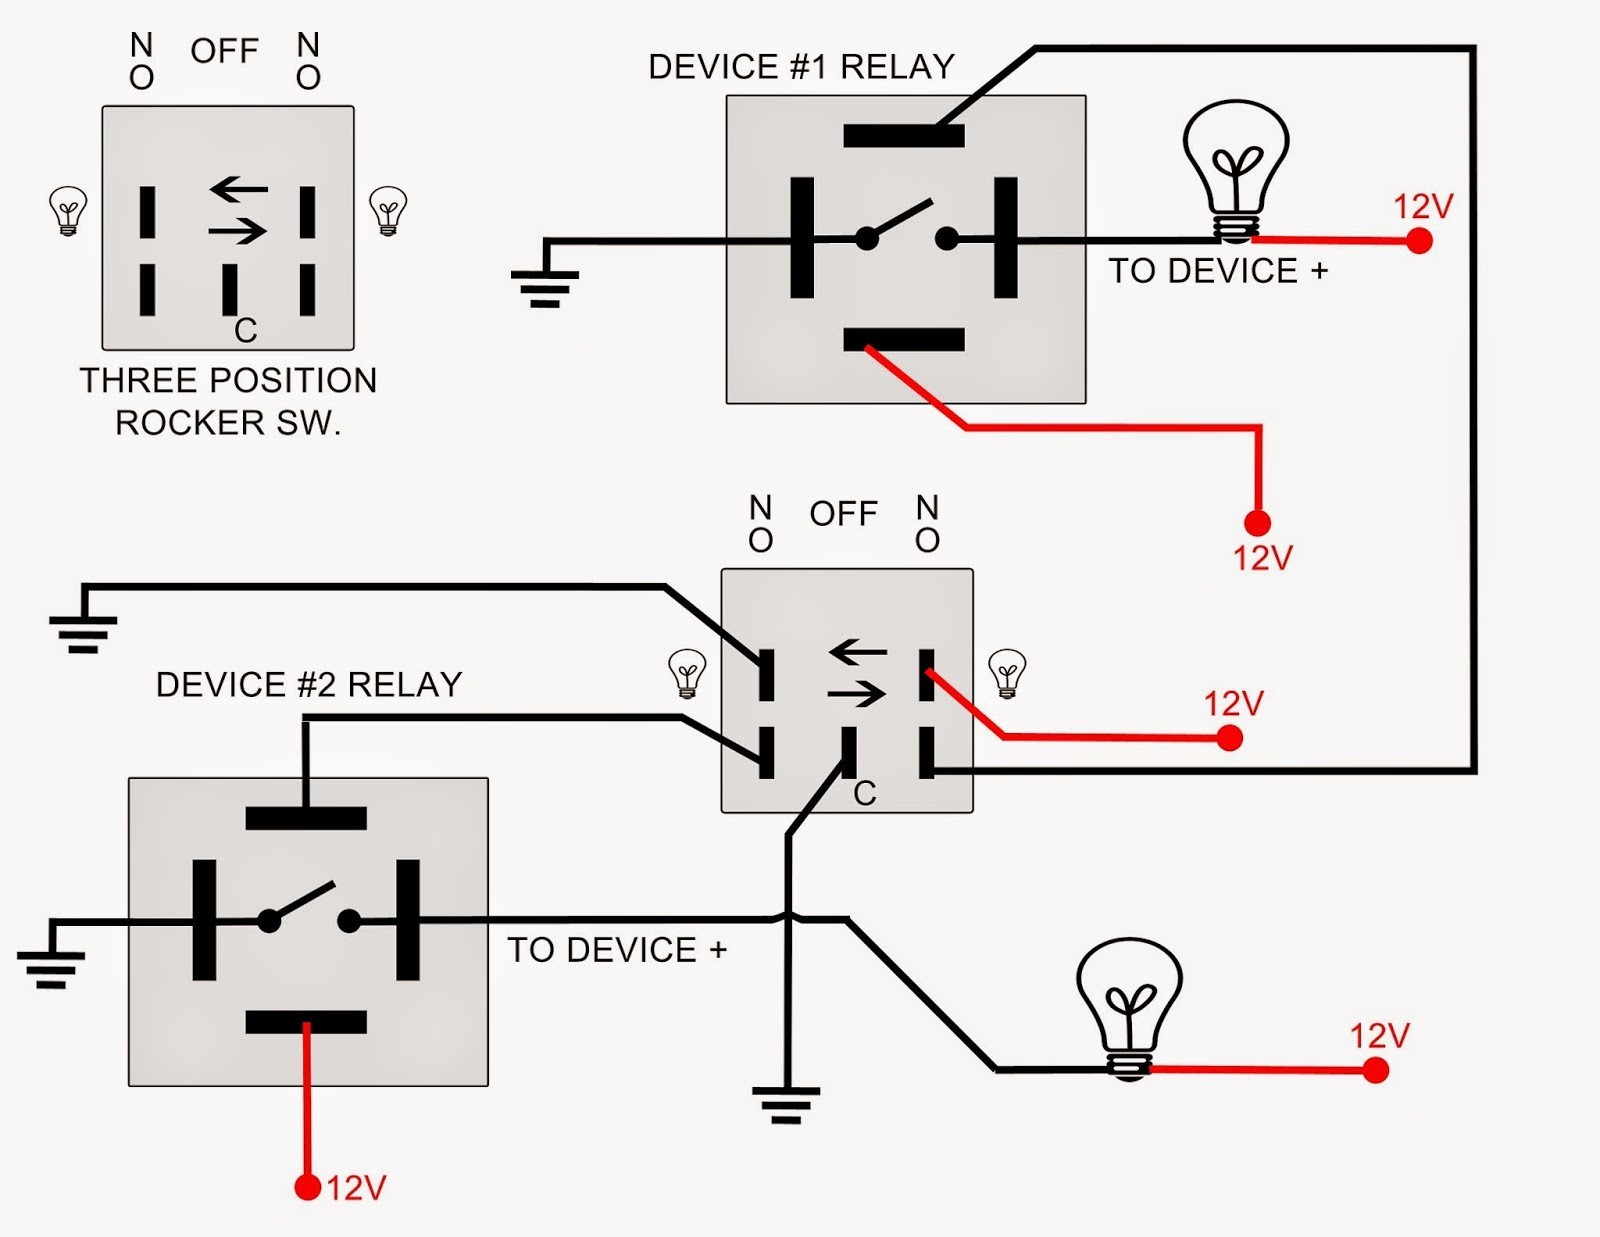 Dpdt Switch Wiring Diagram Guitar Refrence Dpdt Switch Wiring Diagram Guitar New Spdt Rocker Switch Wiring